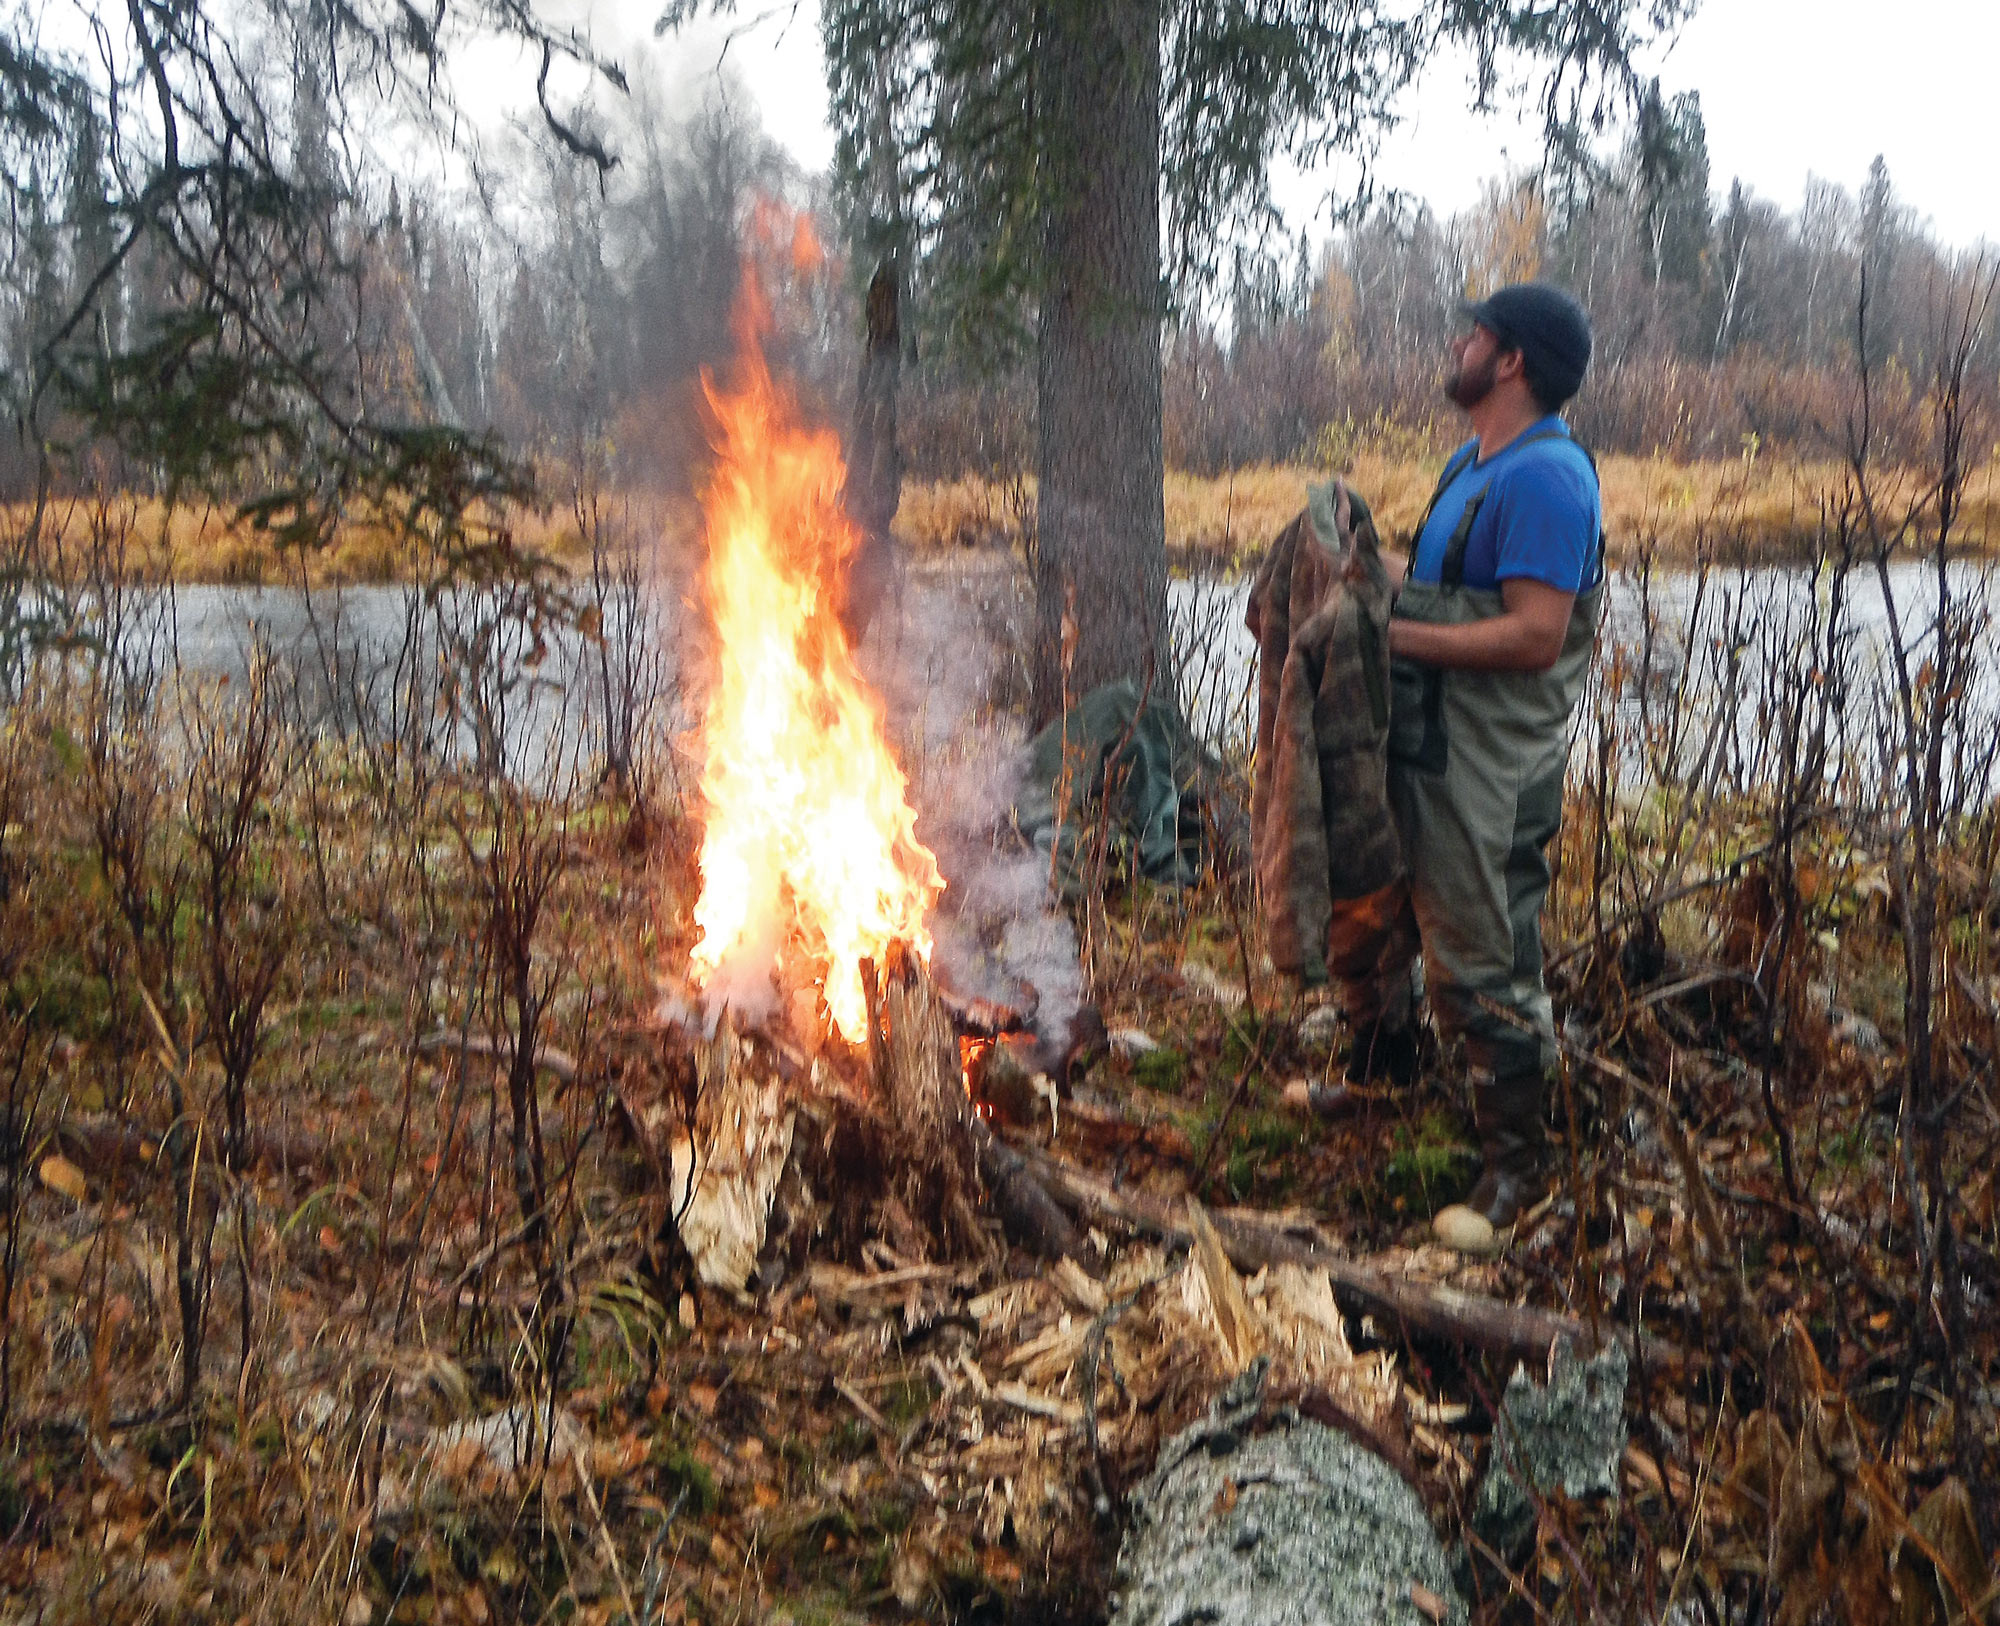 a fire can be a life savor when it comes to wilderness survival